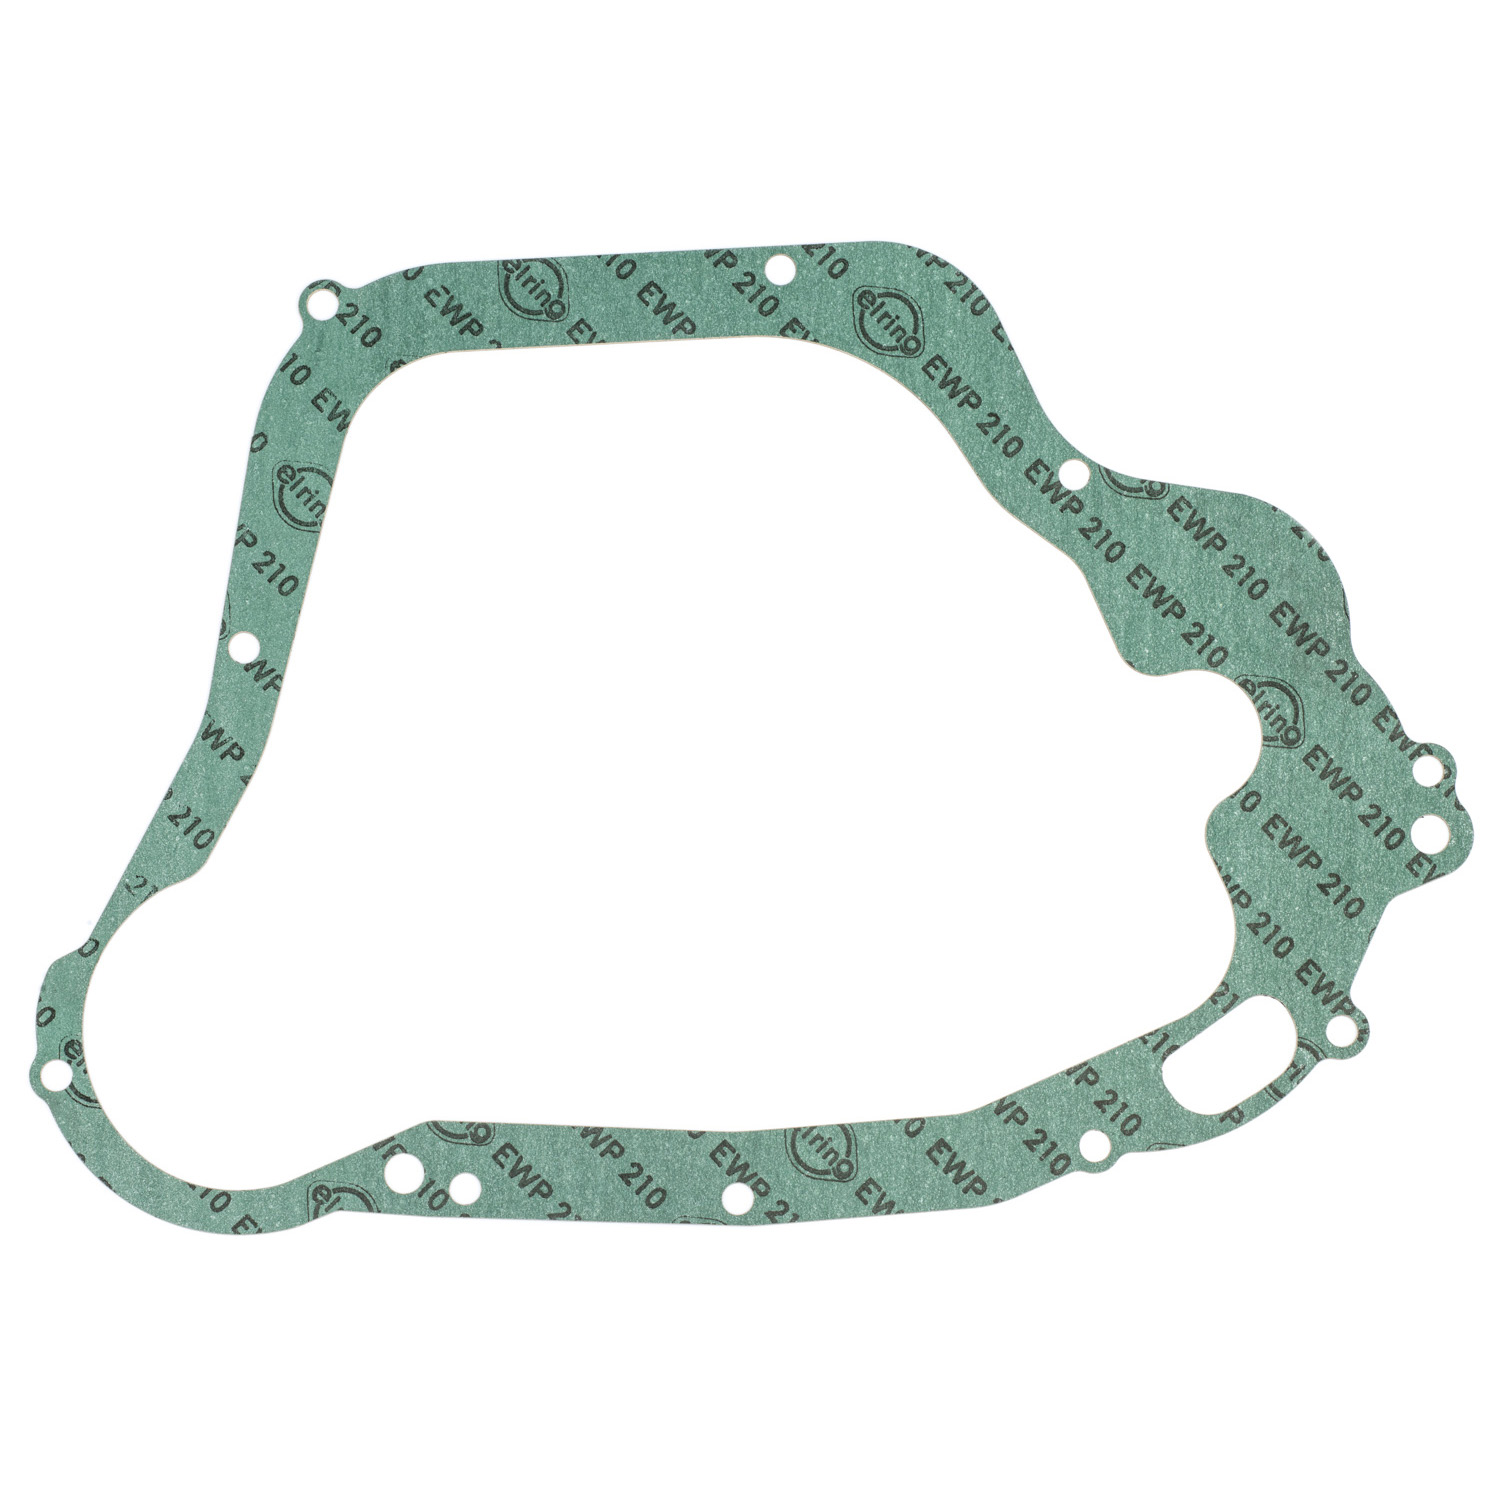 TZR250RS Clutch Cover Gasket